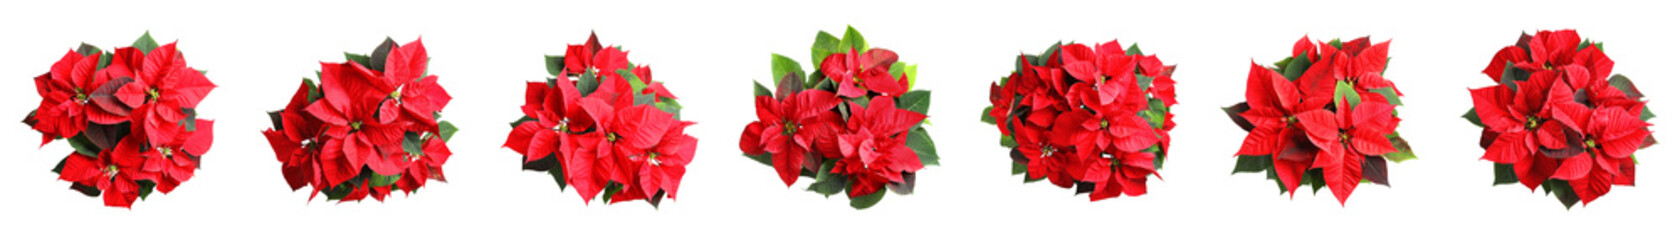 Set of poinsettias on white background, top view. Christmas traditional flower, banner design